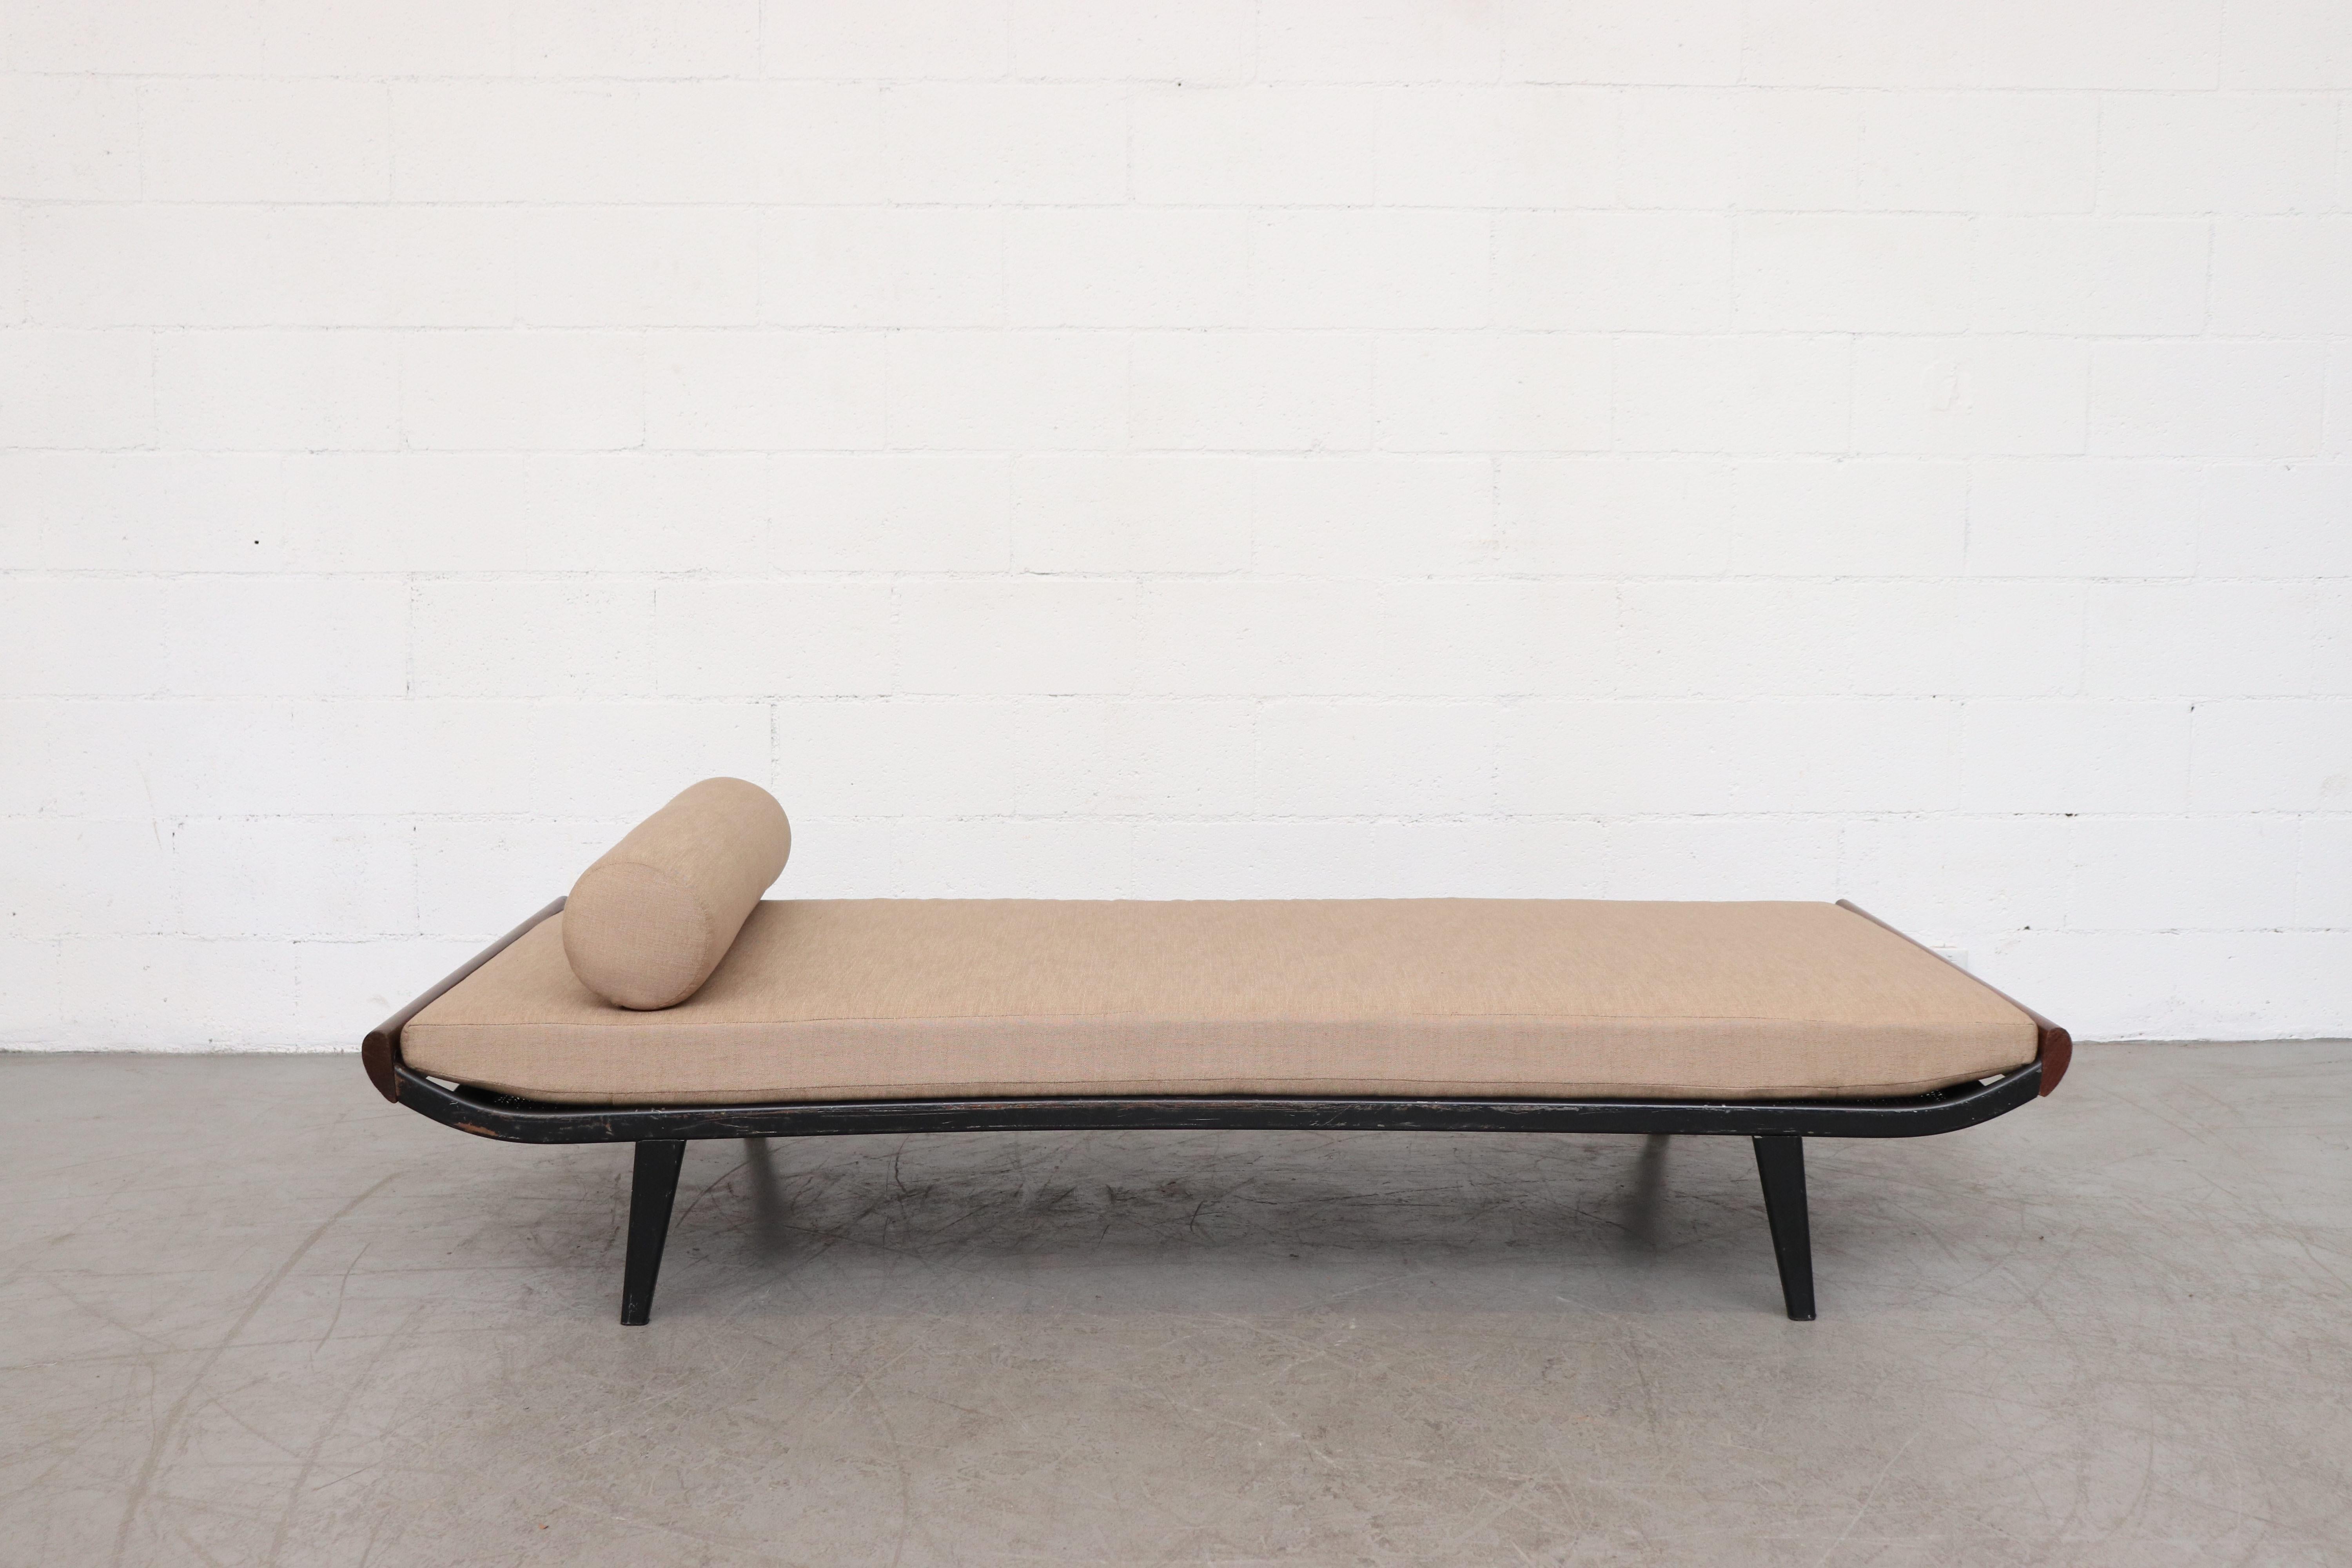 1960s Cleopatra style day bed by A.R. Cordemeyer for Auping with teak ends and dark charcoal grey enameled metal frame with 